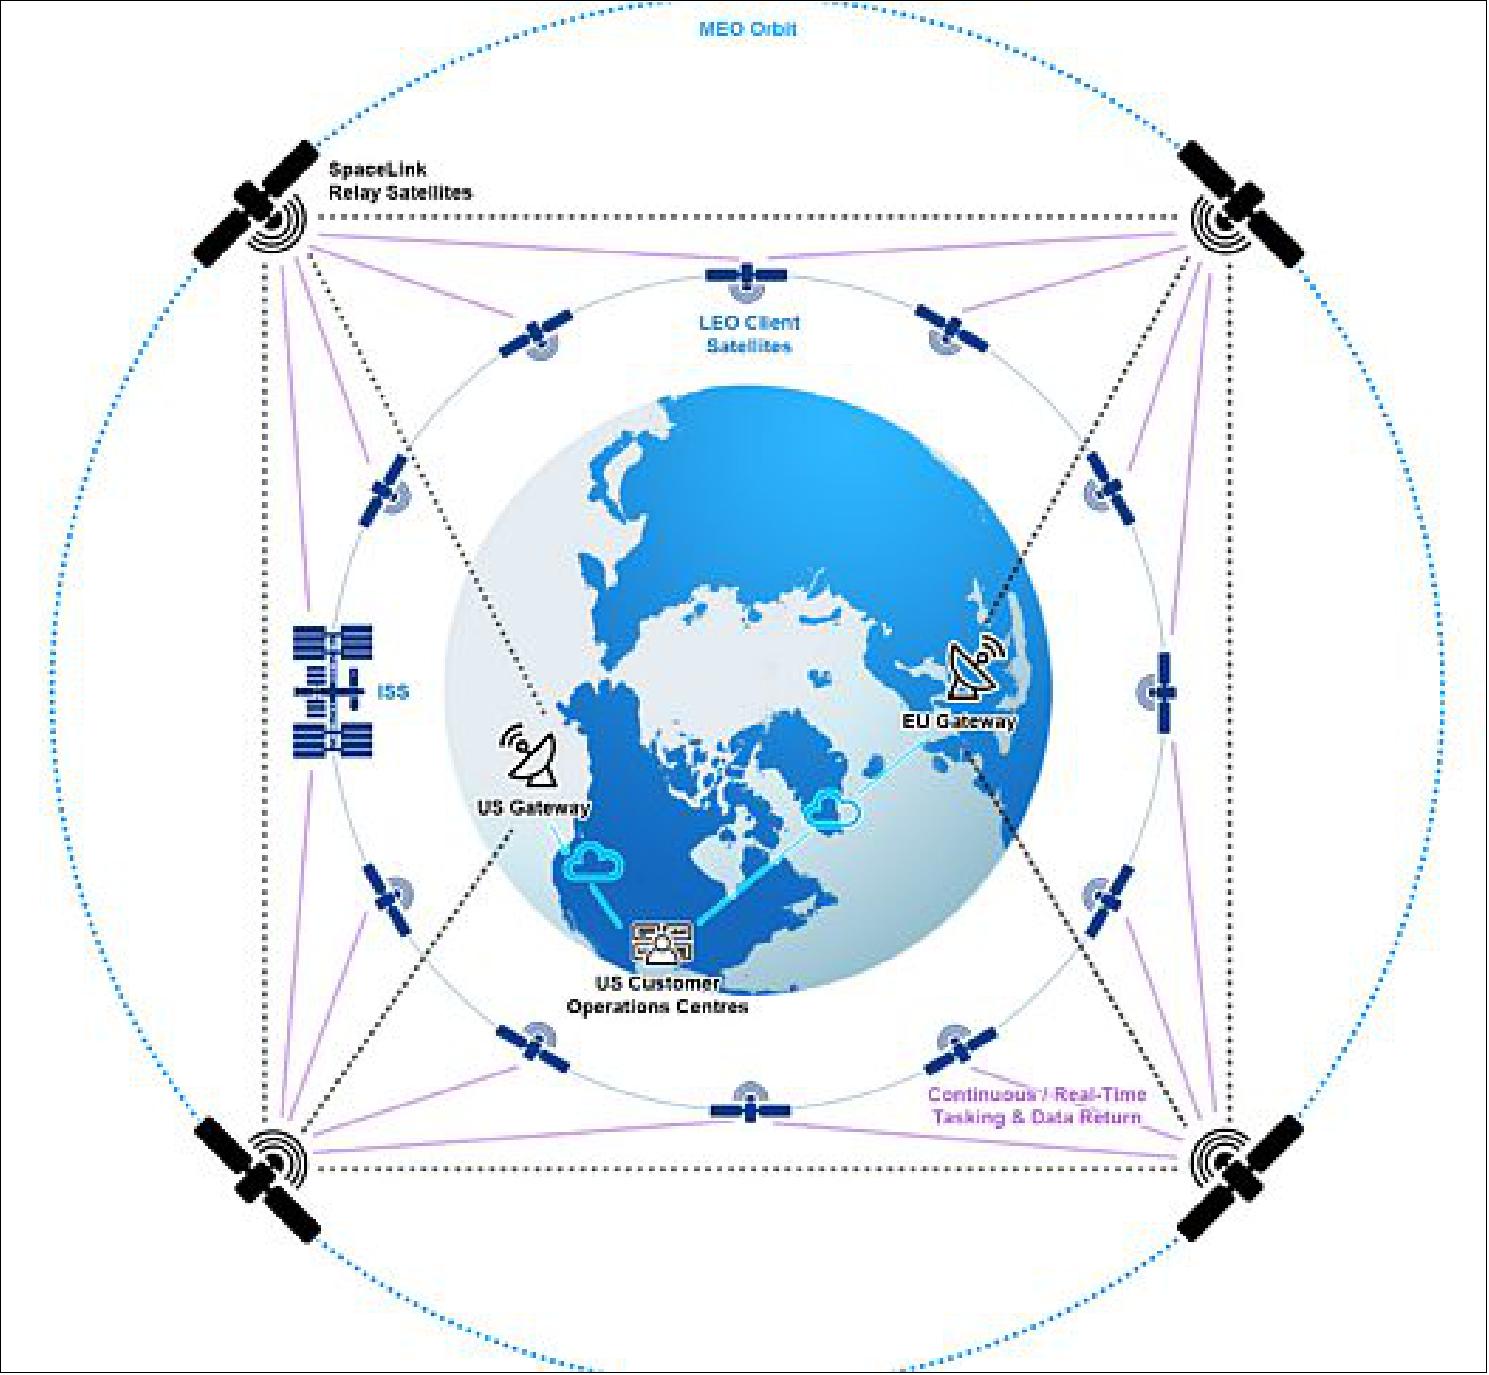 Figure 1: SpaceLink's constellation aims to continuously transmit user data to the ground for immediate access via the internet, private cloud, or other secure delivery. (image credit: SpaceLink)